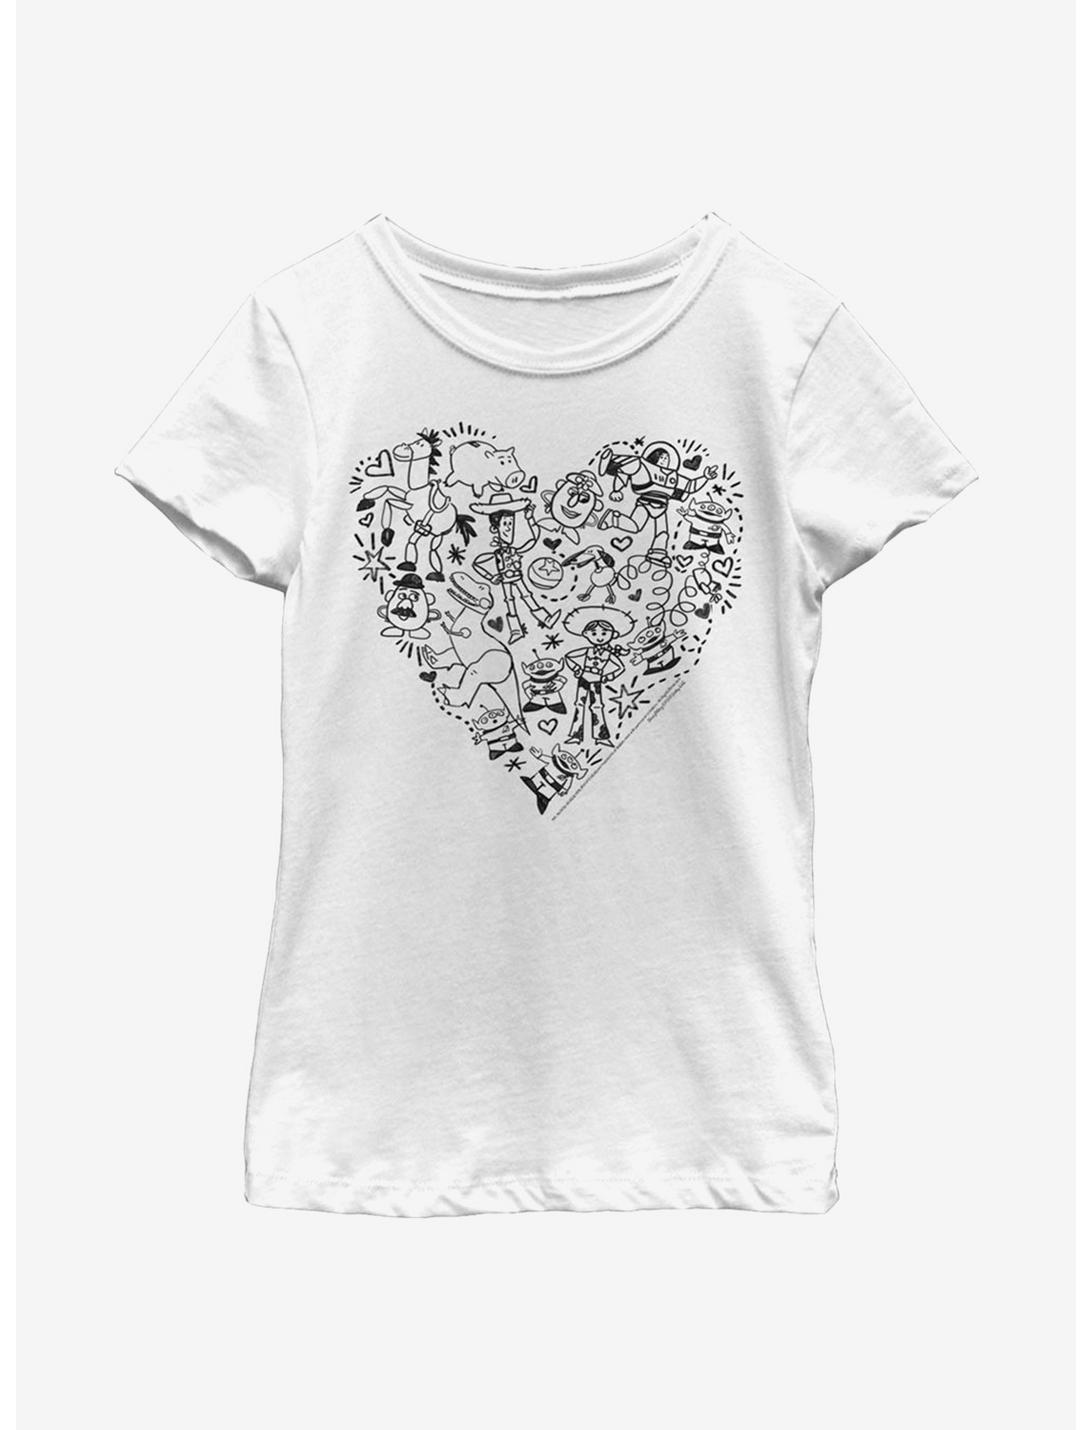 Disney Pixar Toy Story Group Doodle Heart Youth Girls T-Shirt, WHITE, hi-res